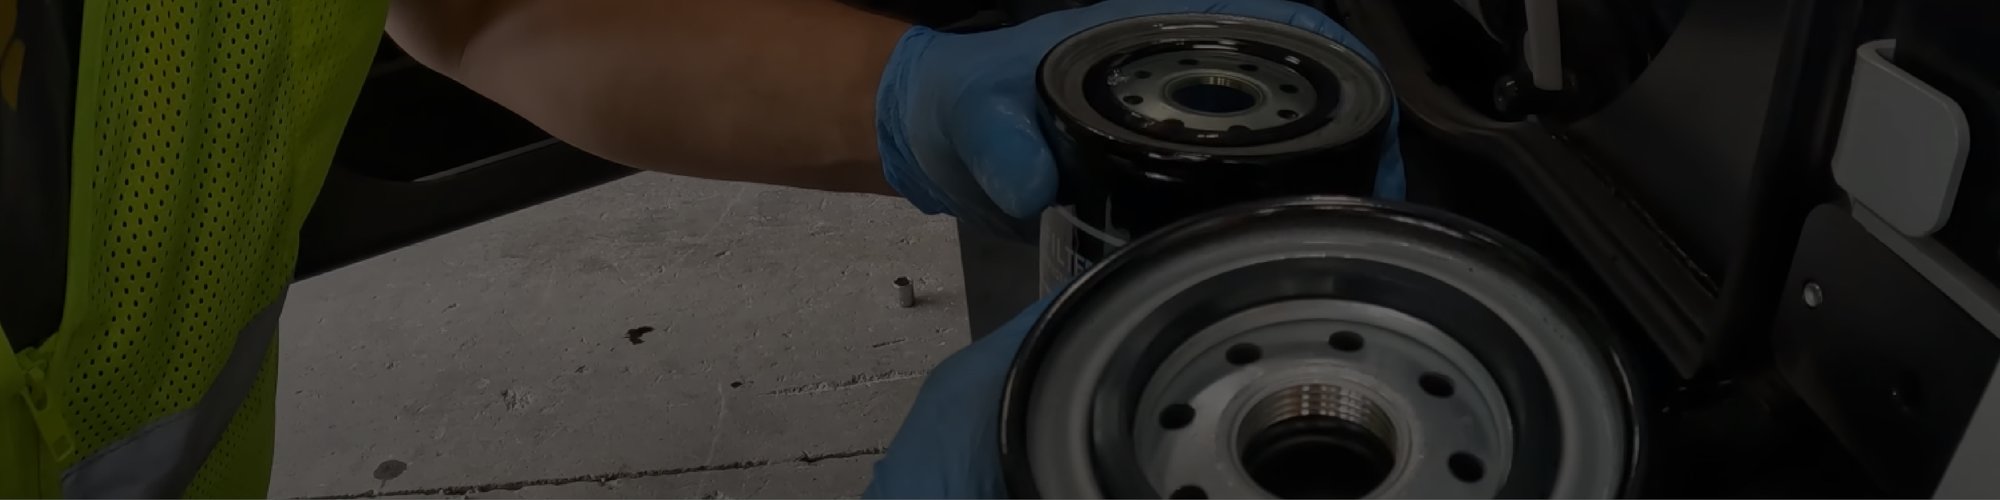 O-Rings vs Gaskets: What's the Difference?, Blog Posts